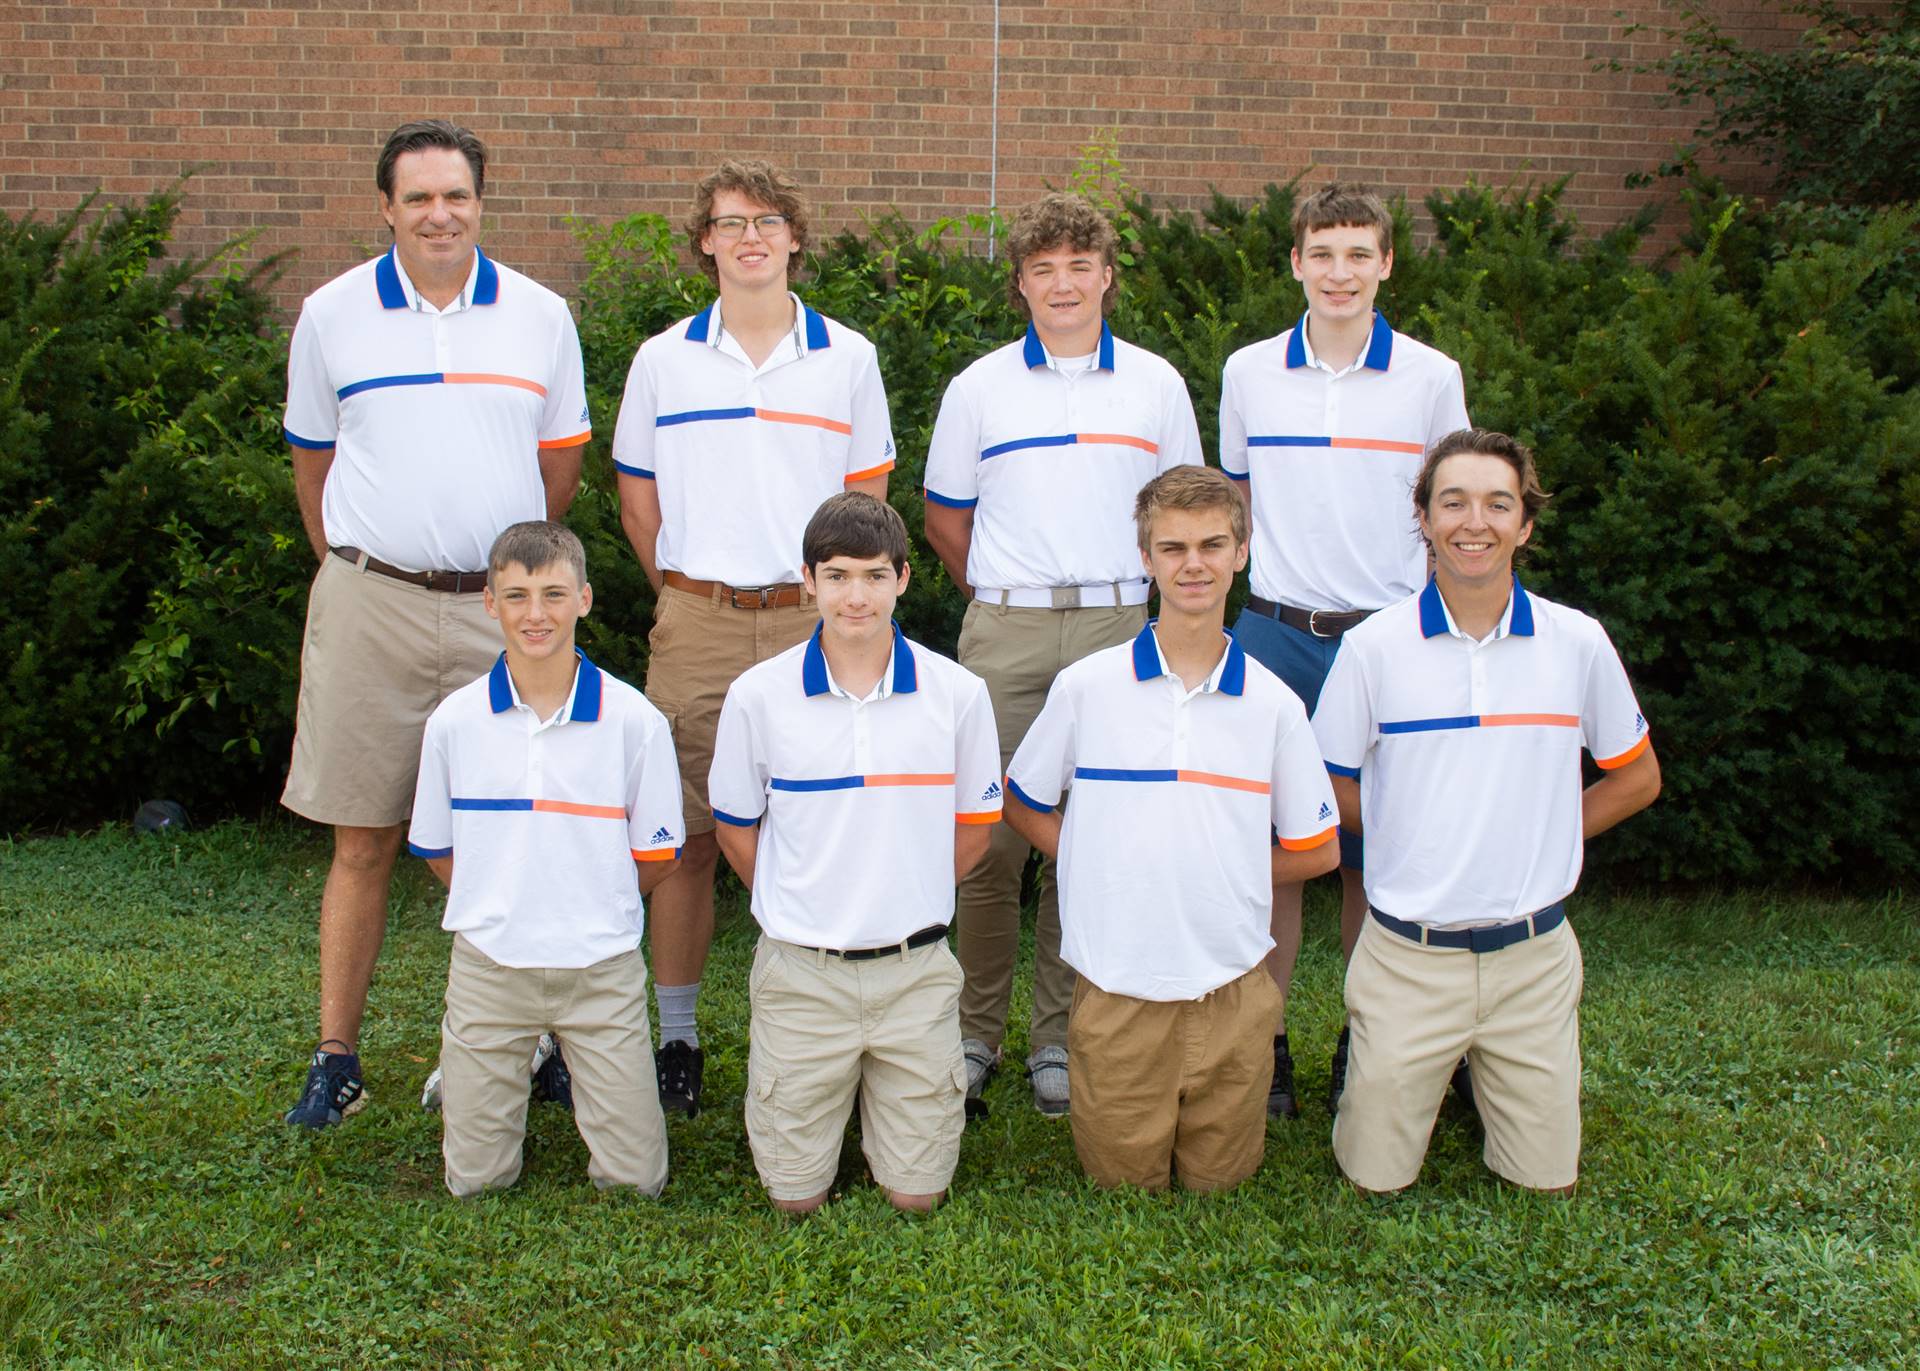 Charger Golf Team